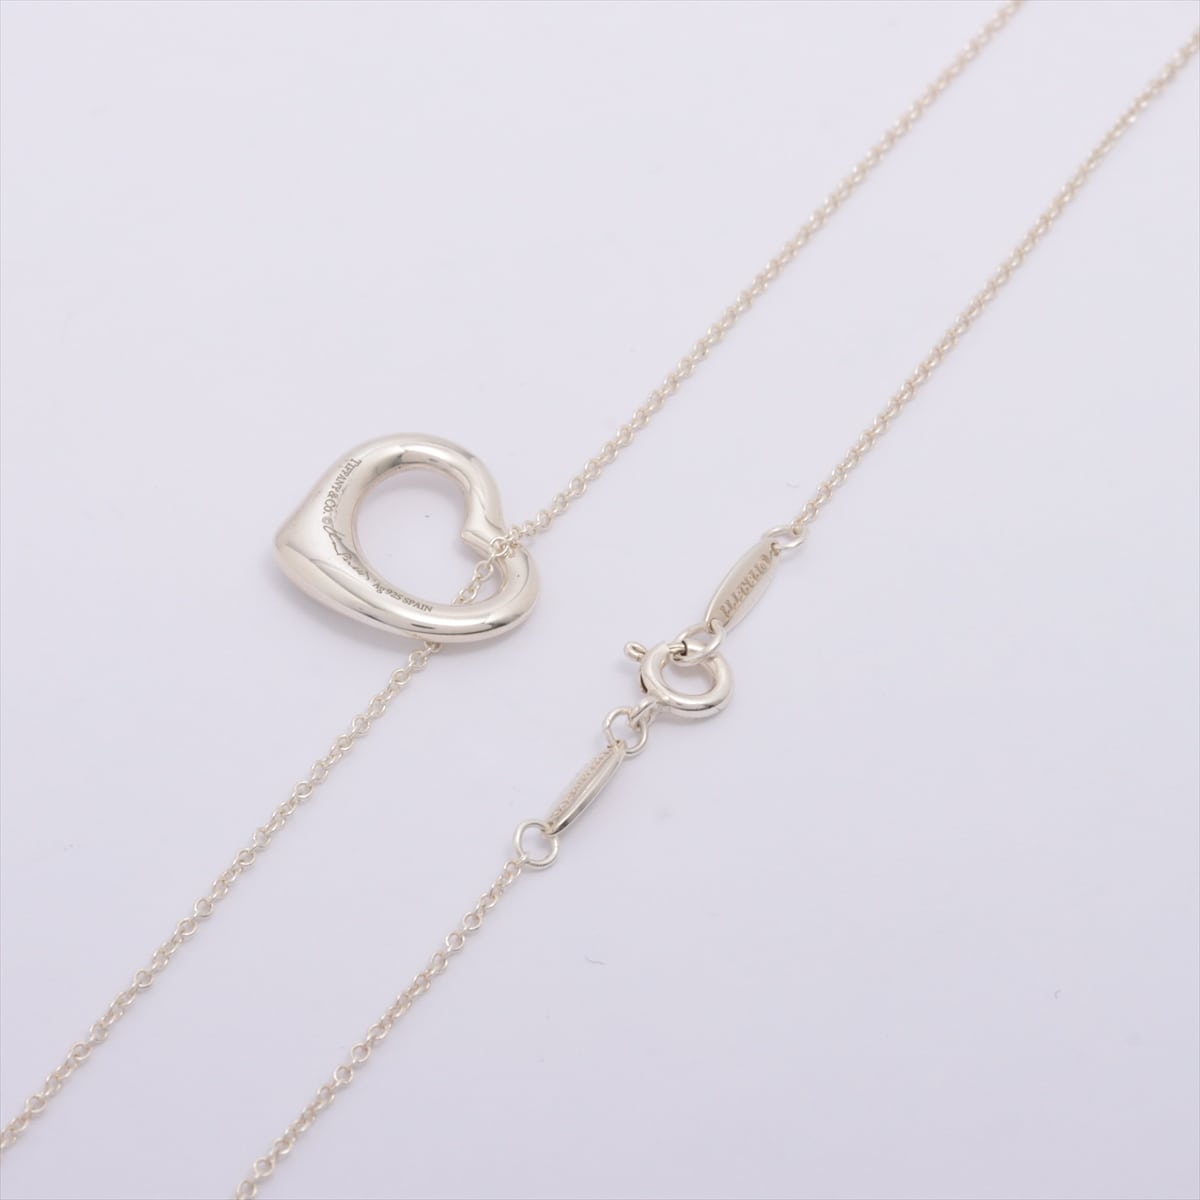 Tiffany Open Heart Necklace 925 3.3g Silver